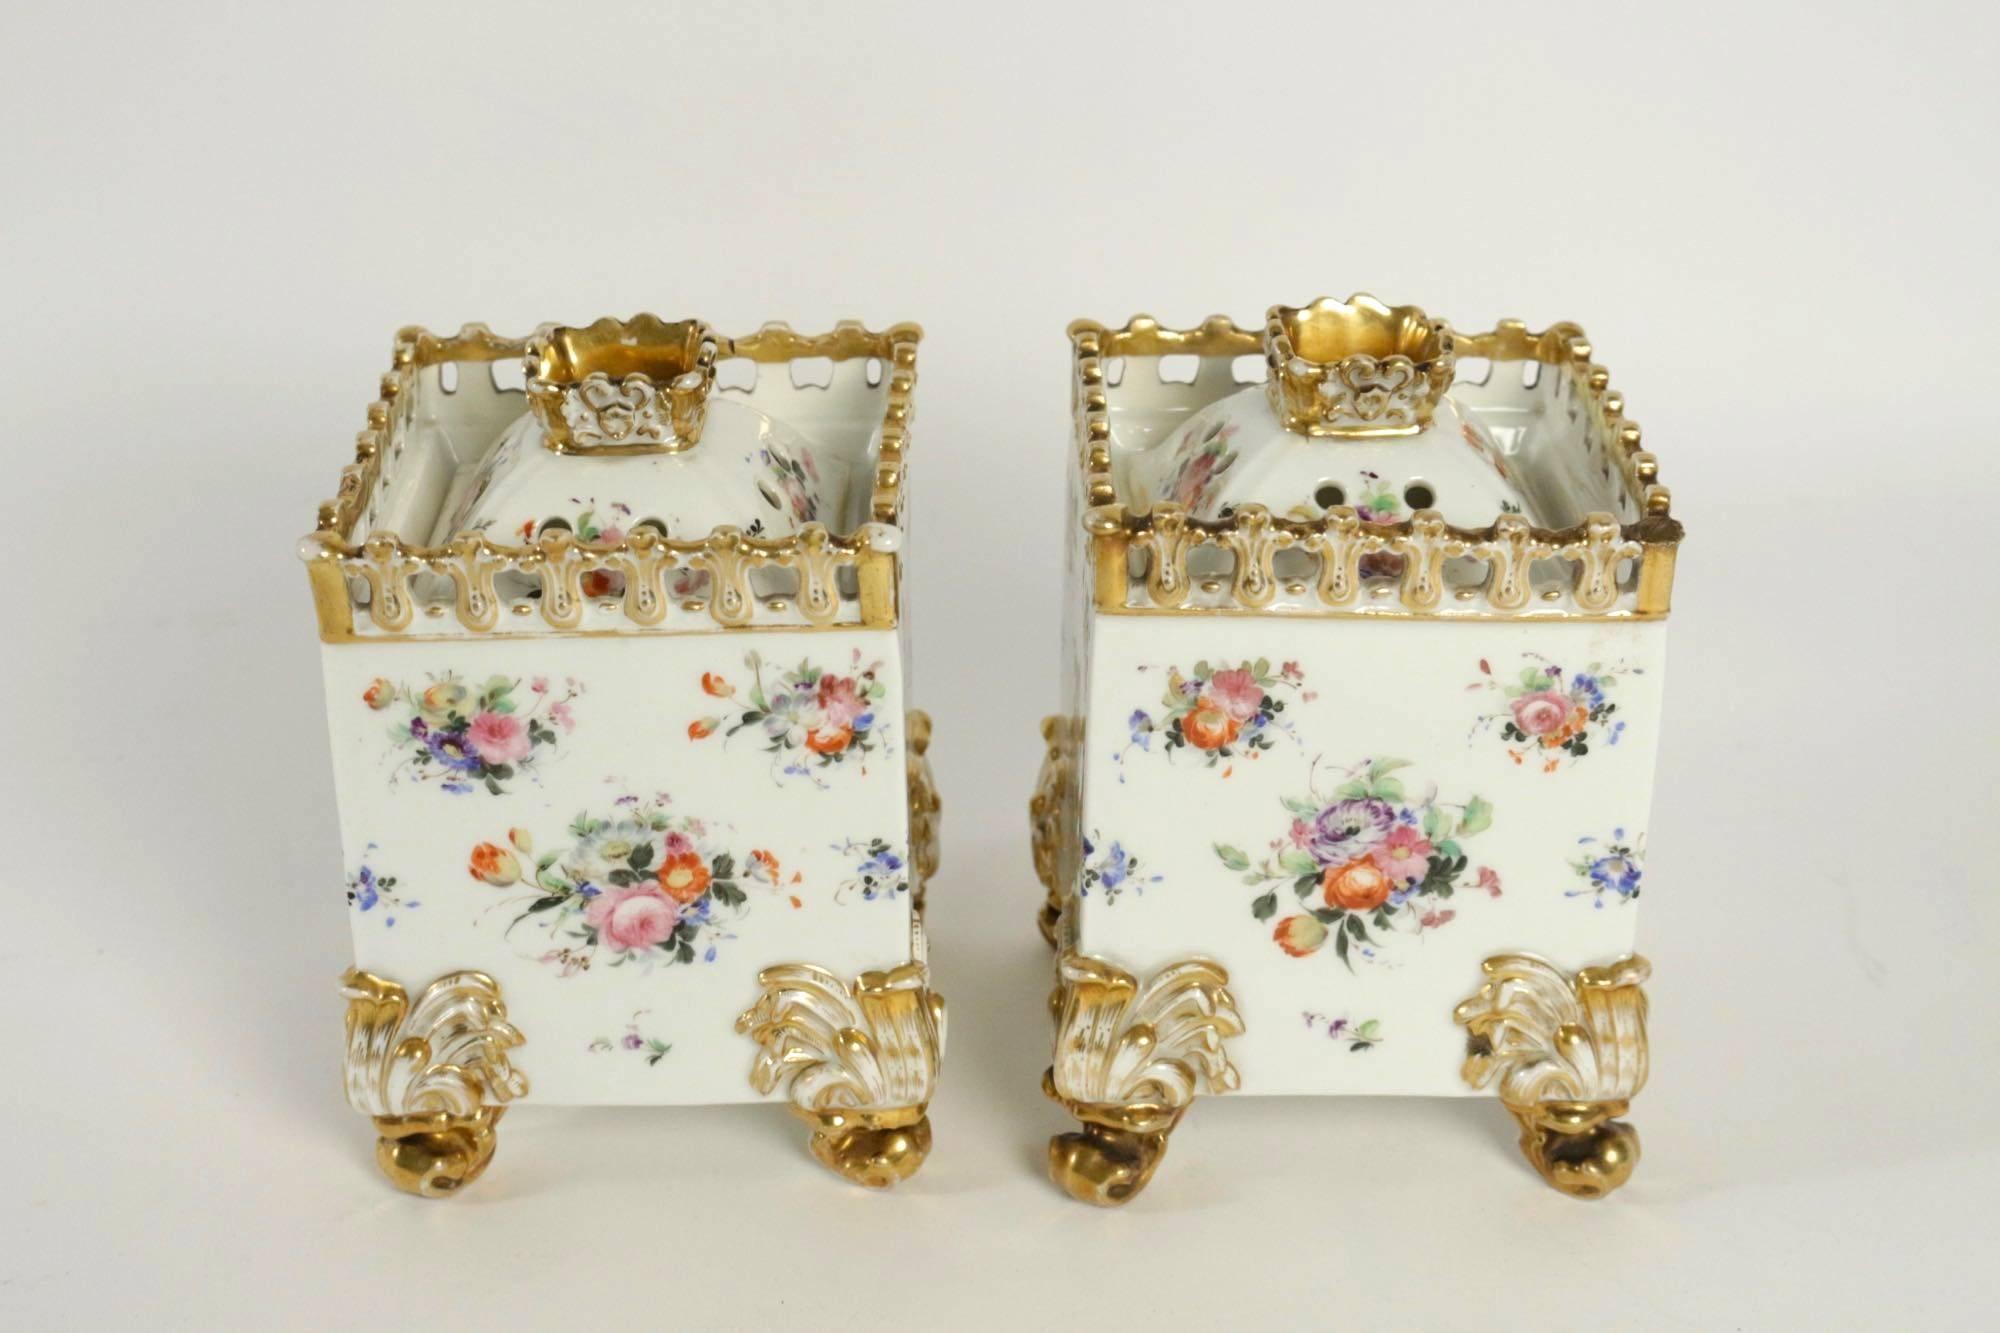 Paris porcelain.
Work from 1830-1850.
Polychrome flowers decor on white background and gilt highlights.
Unreadable mark underneath.
Standing on four curved feet.